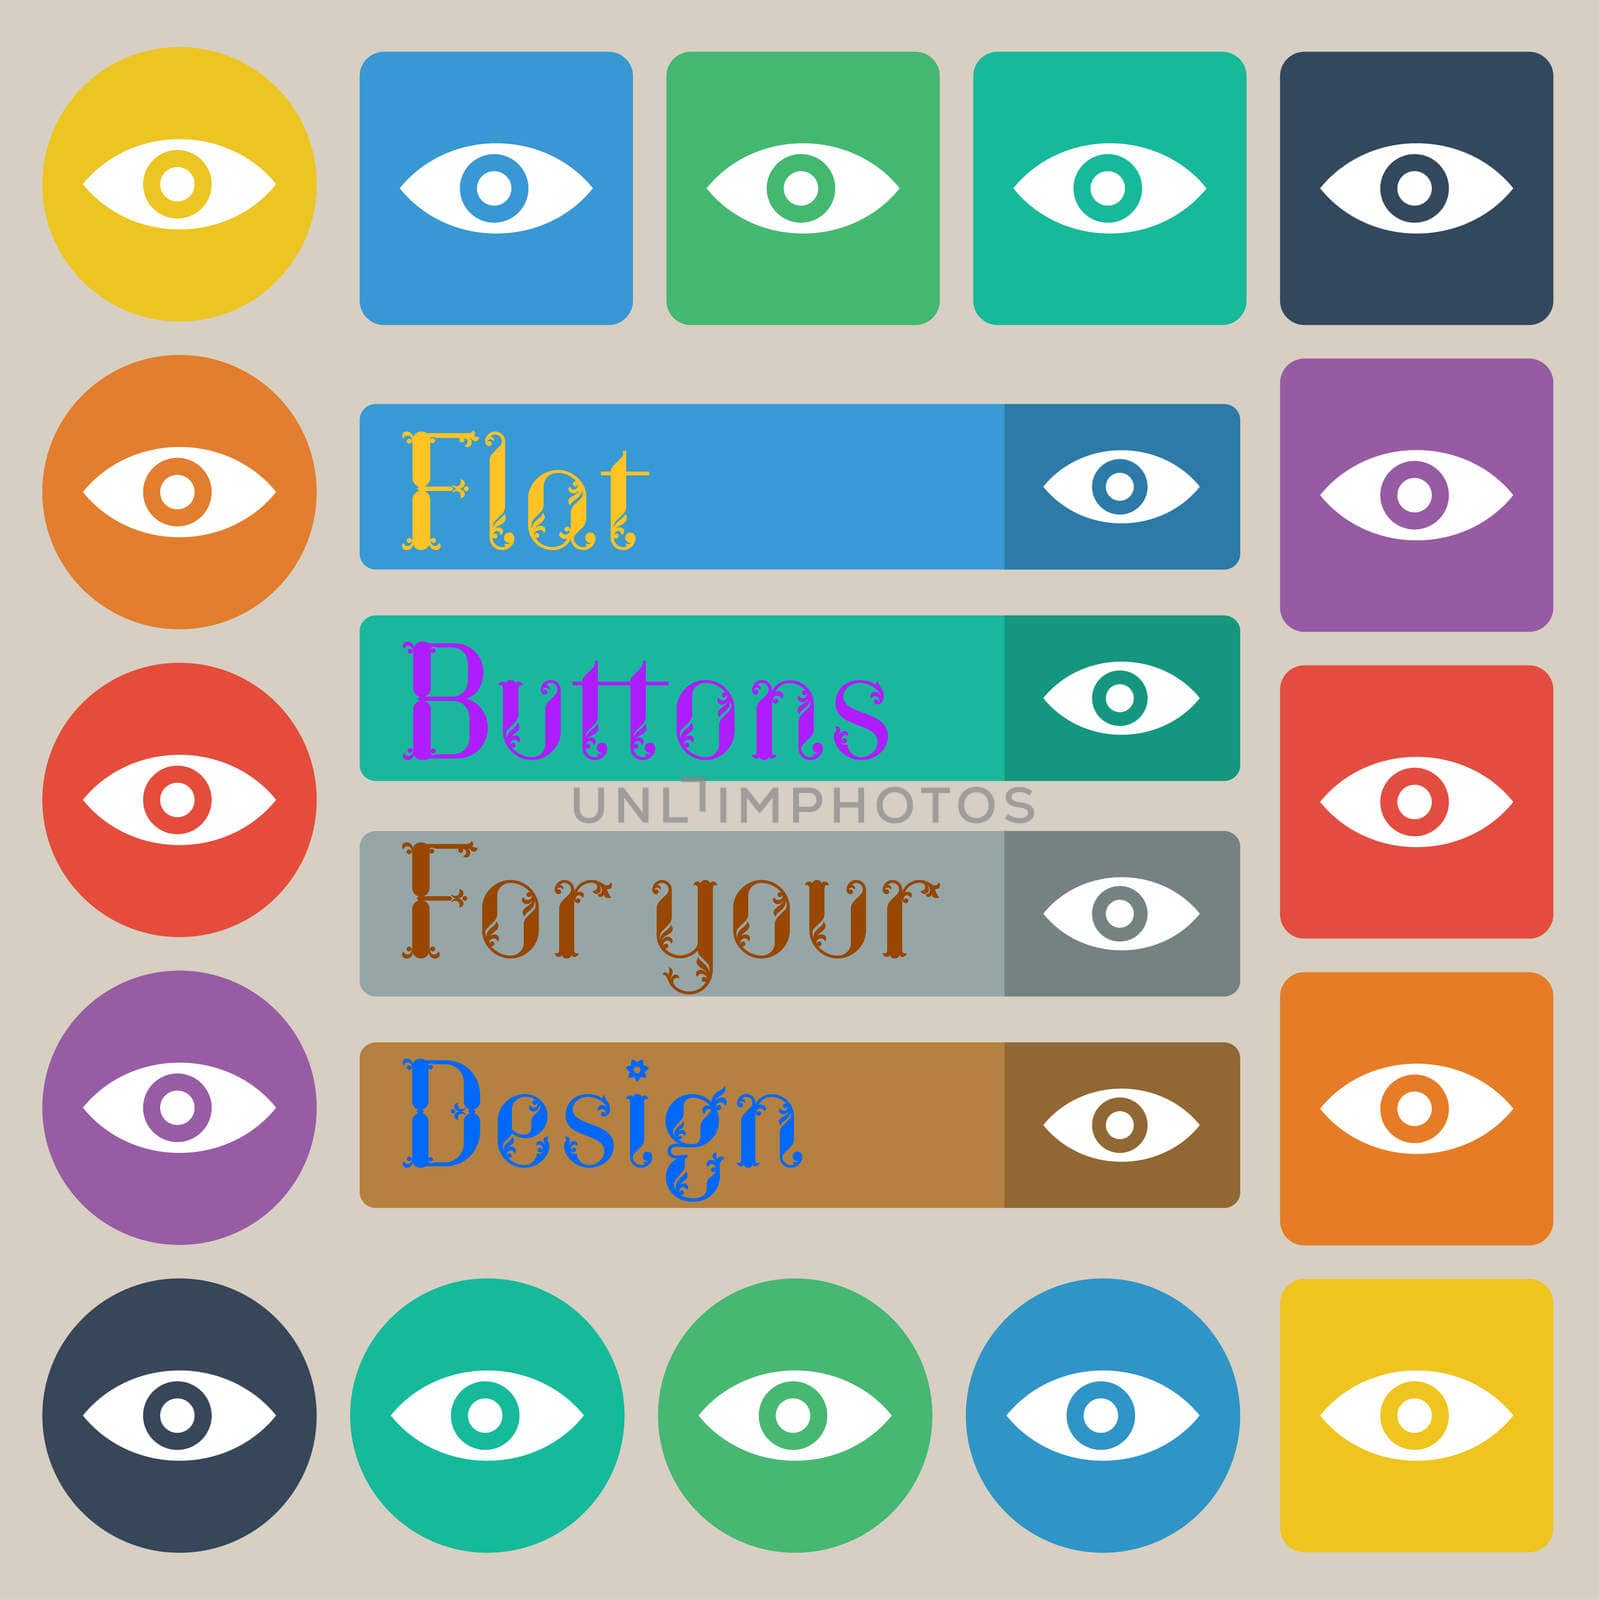 Eye, Publish content, sixth sense, intuition icon sign. Set of twenty colored flat, round, square and rectangular buttons. illustration